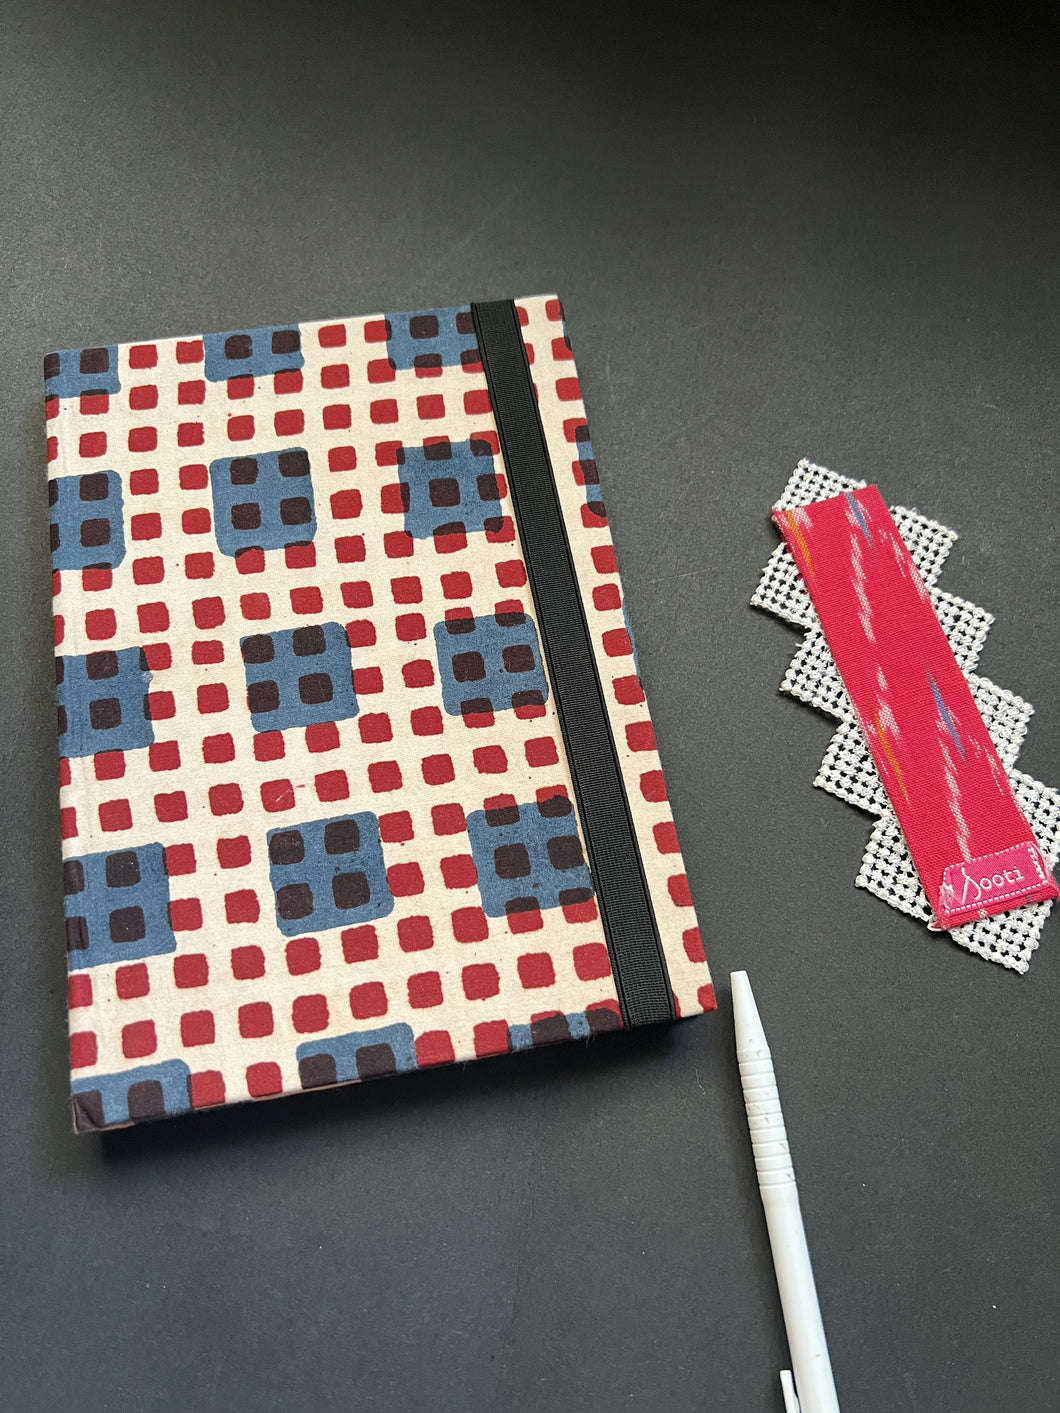 Sooti Diary | Journal Ruled With Handmade Cotton Cover